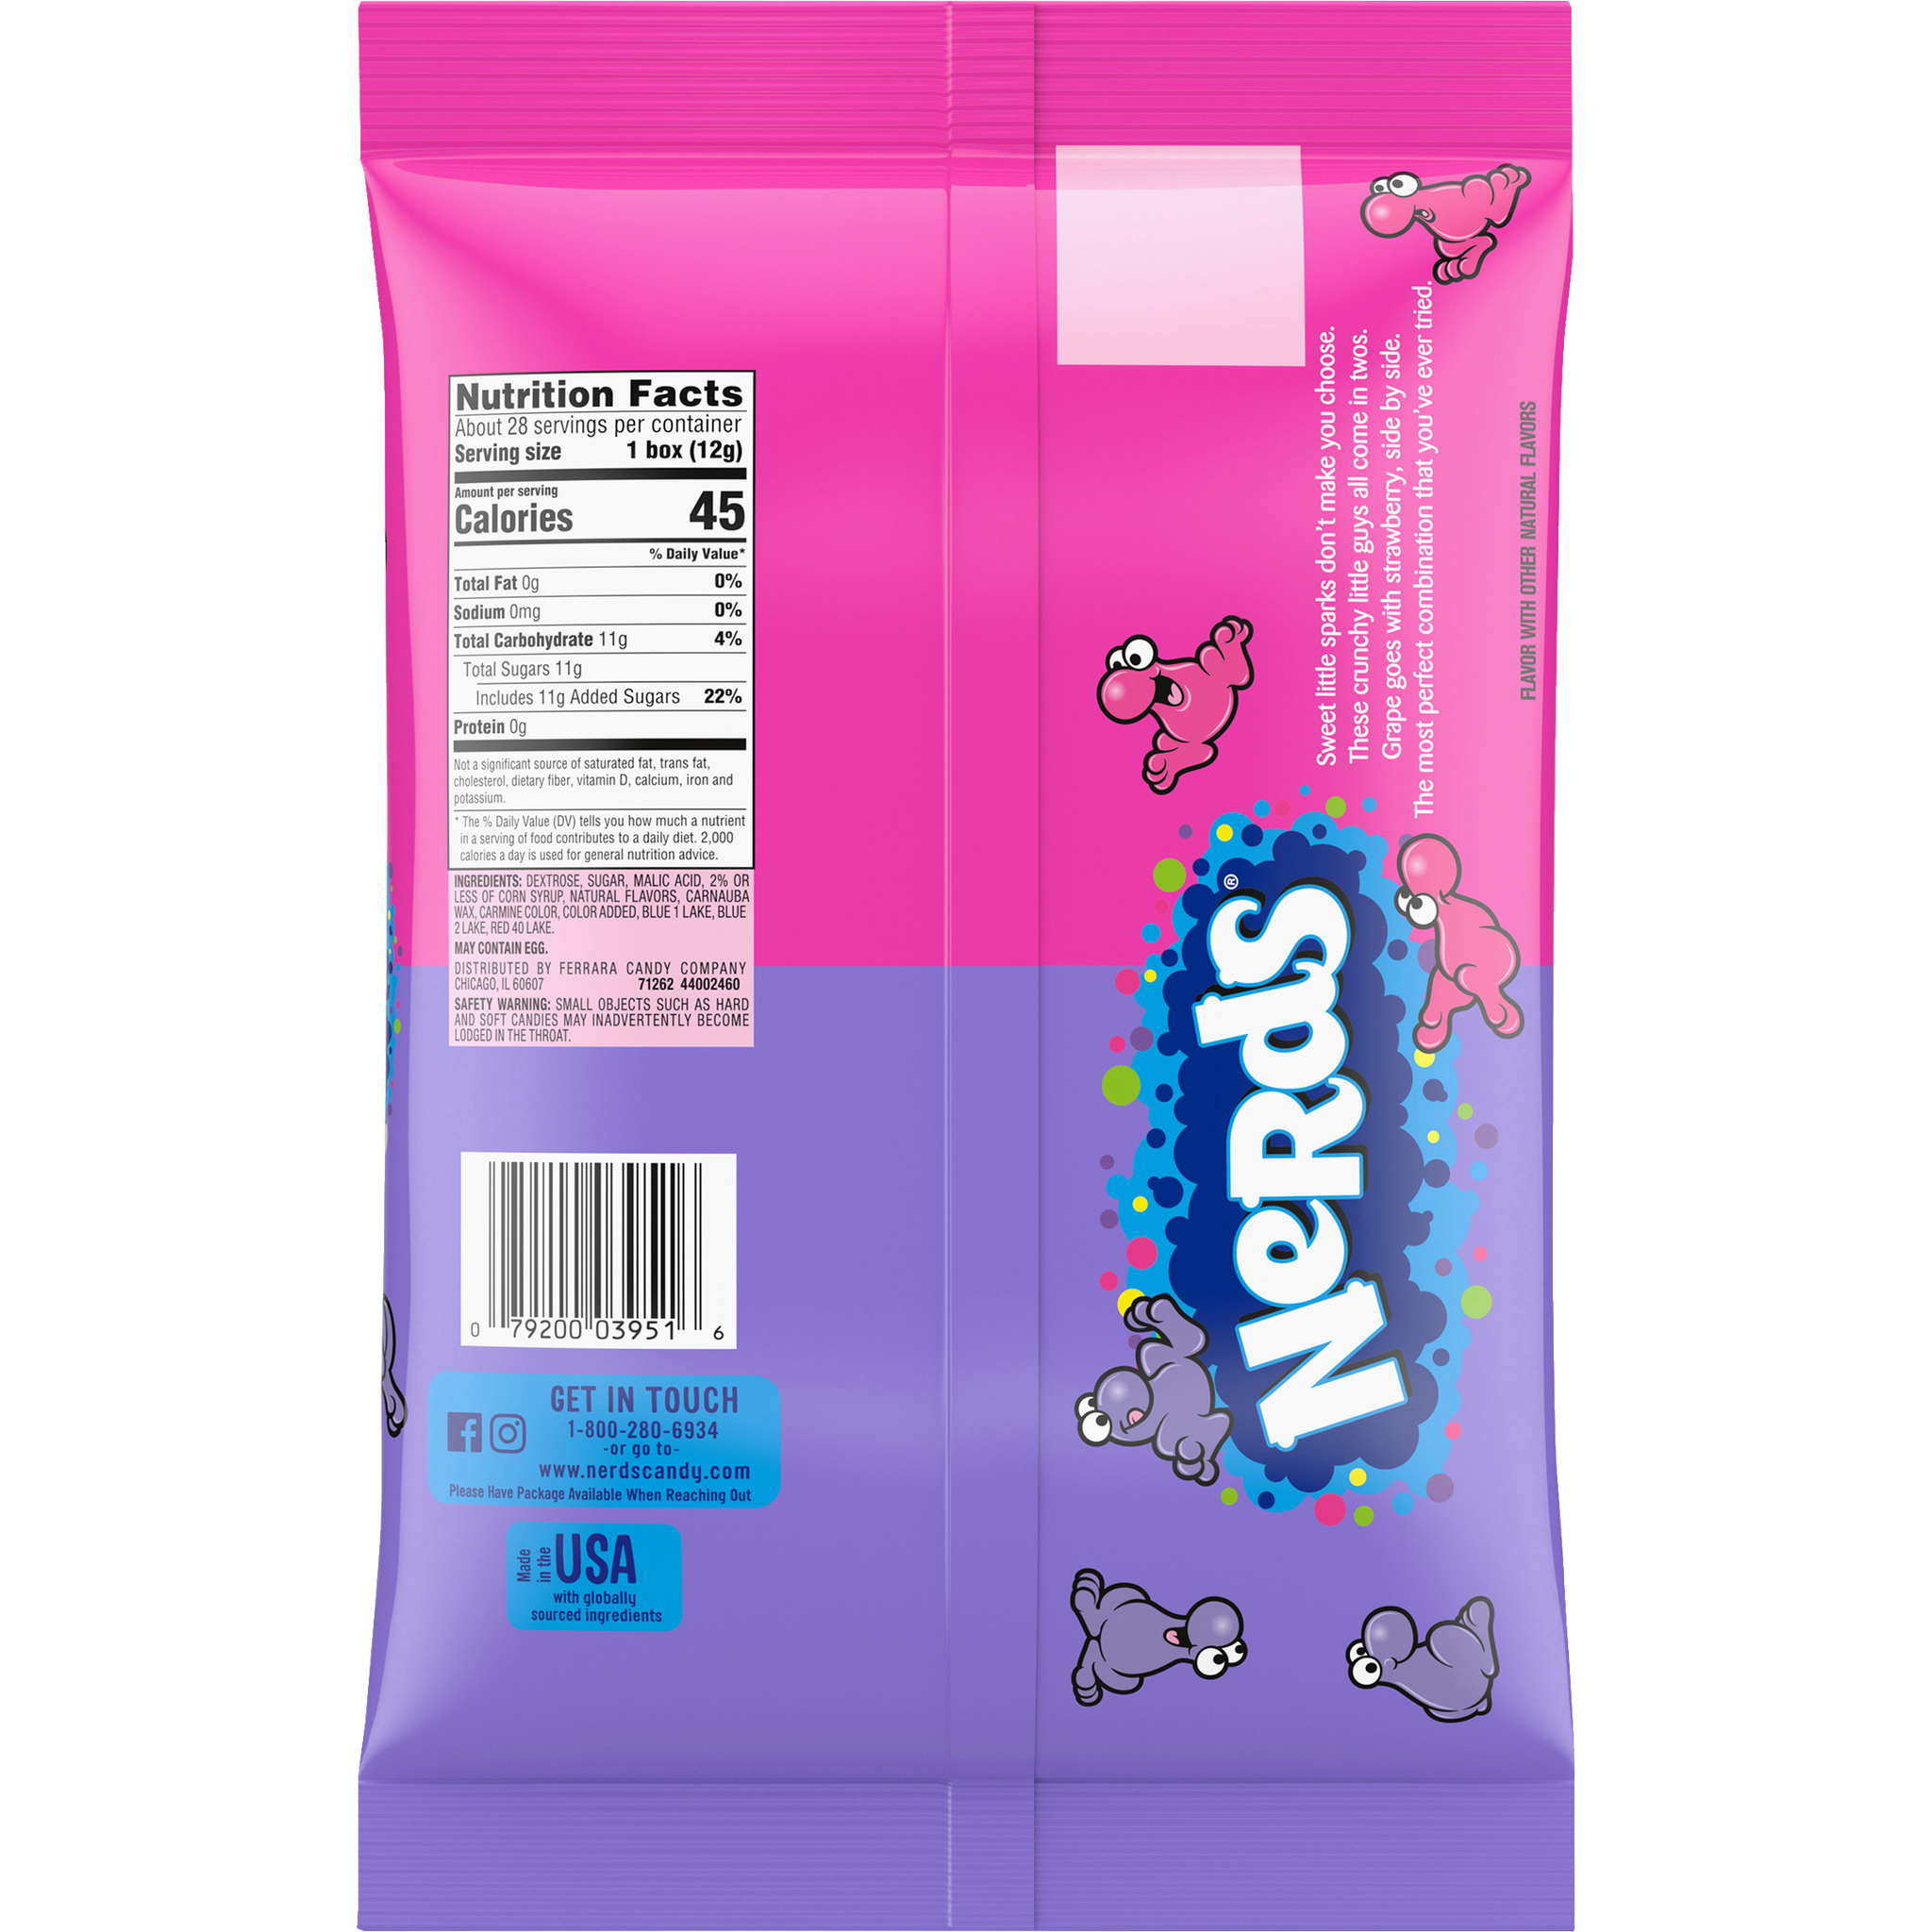 Nerds Grape and Strawberry Candy Laydown Bag, 12 oz